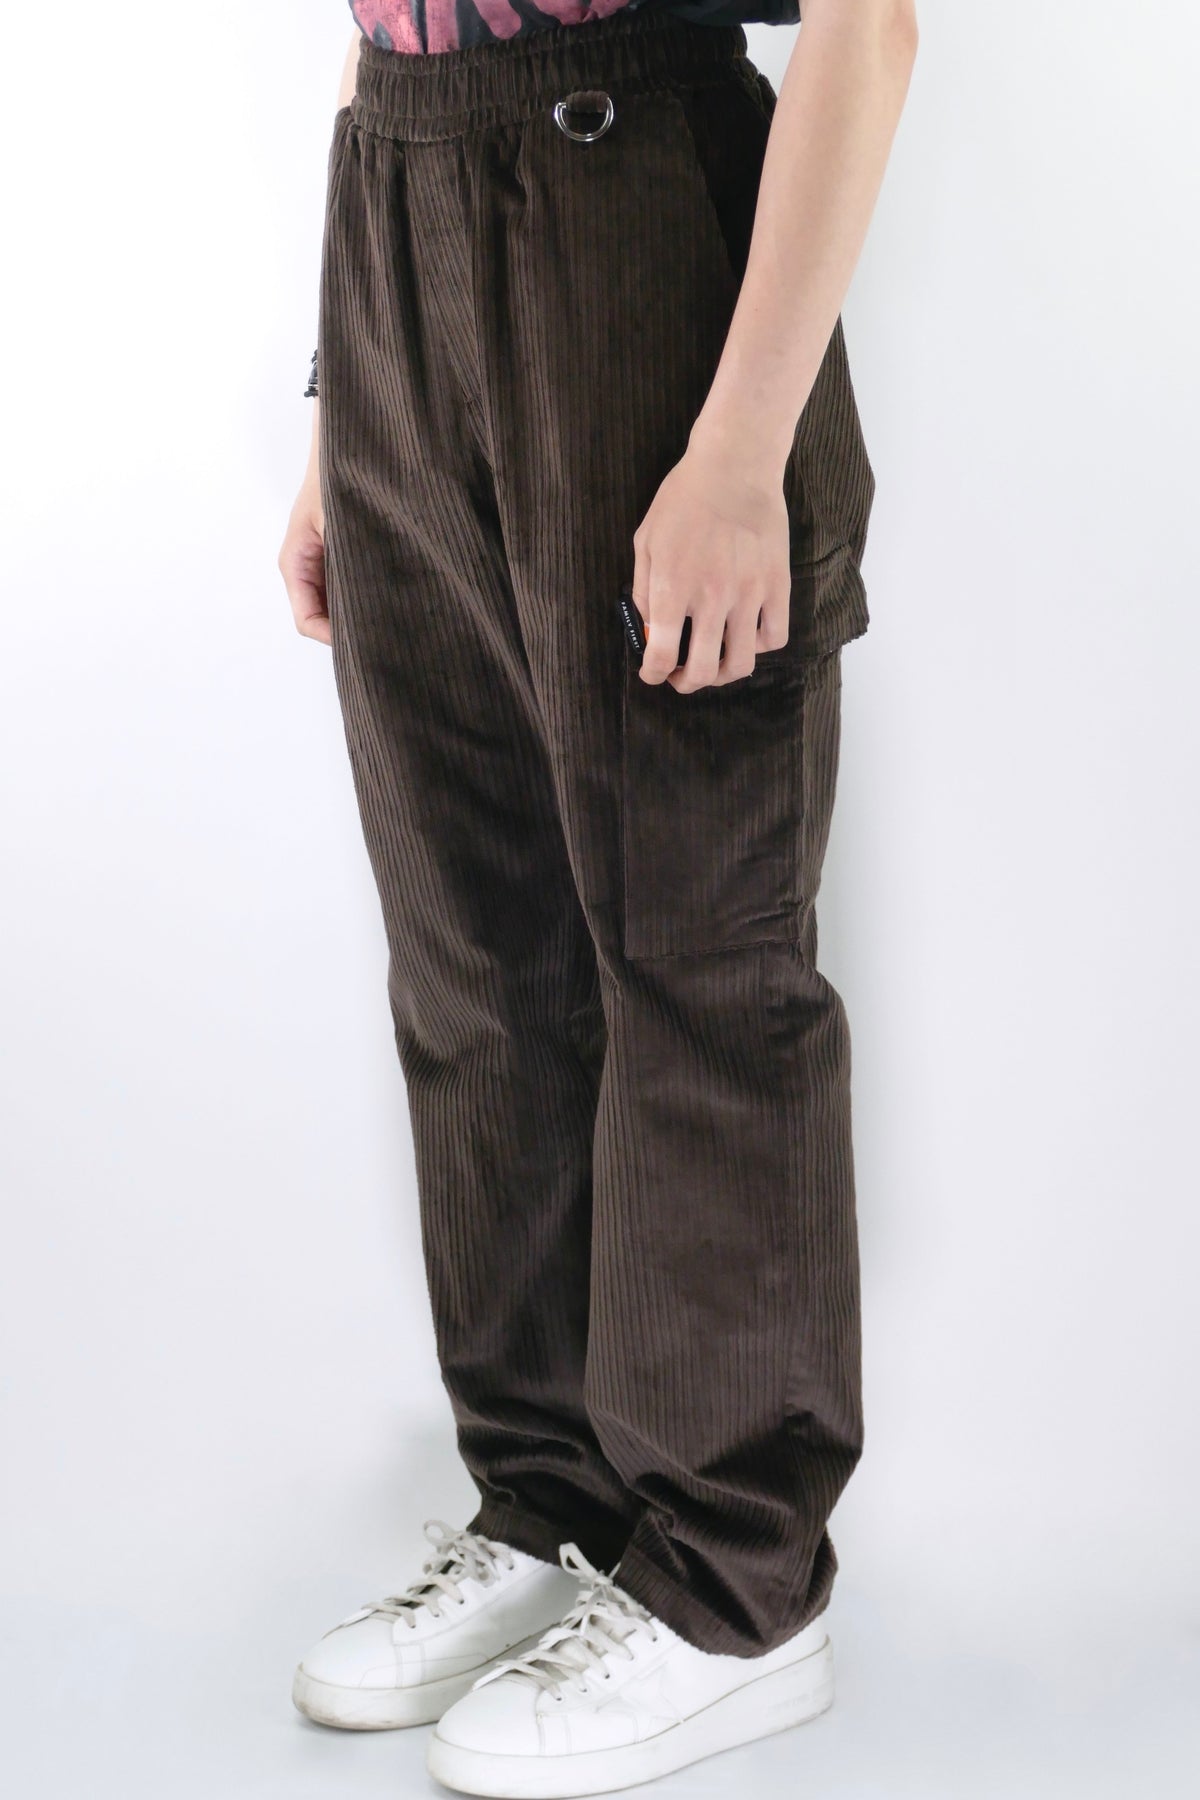 Family First Corduroy Cargo Pant - Brown